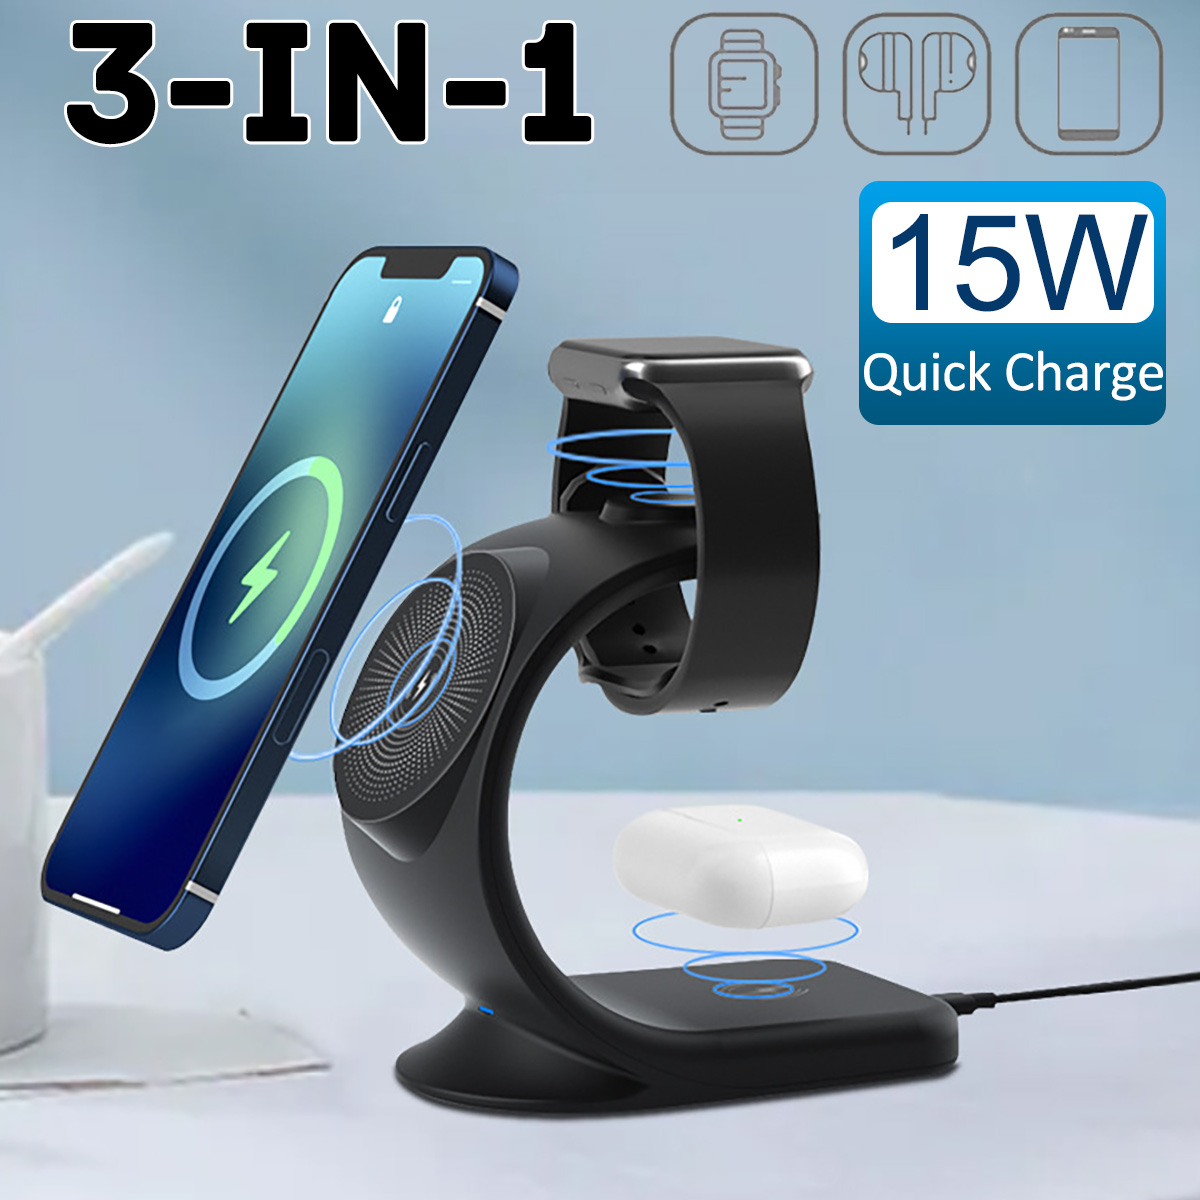 3-IN-1-Magnetic-Wireless-Charging-Station-15W-Fast-Dock-Charger-Stand-Phone-Watch-Pods-for-iPhone-12-1912276-1